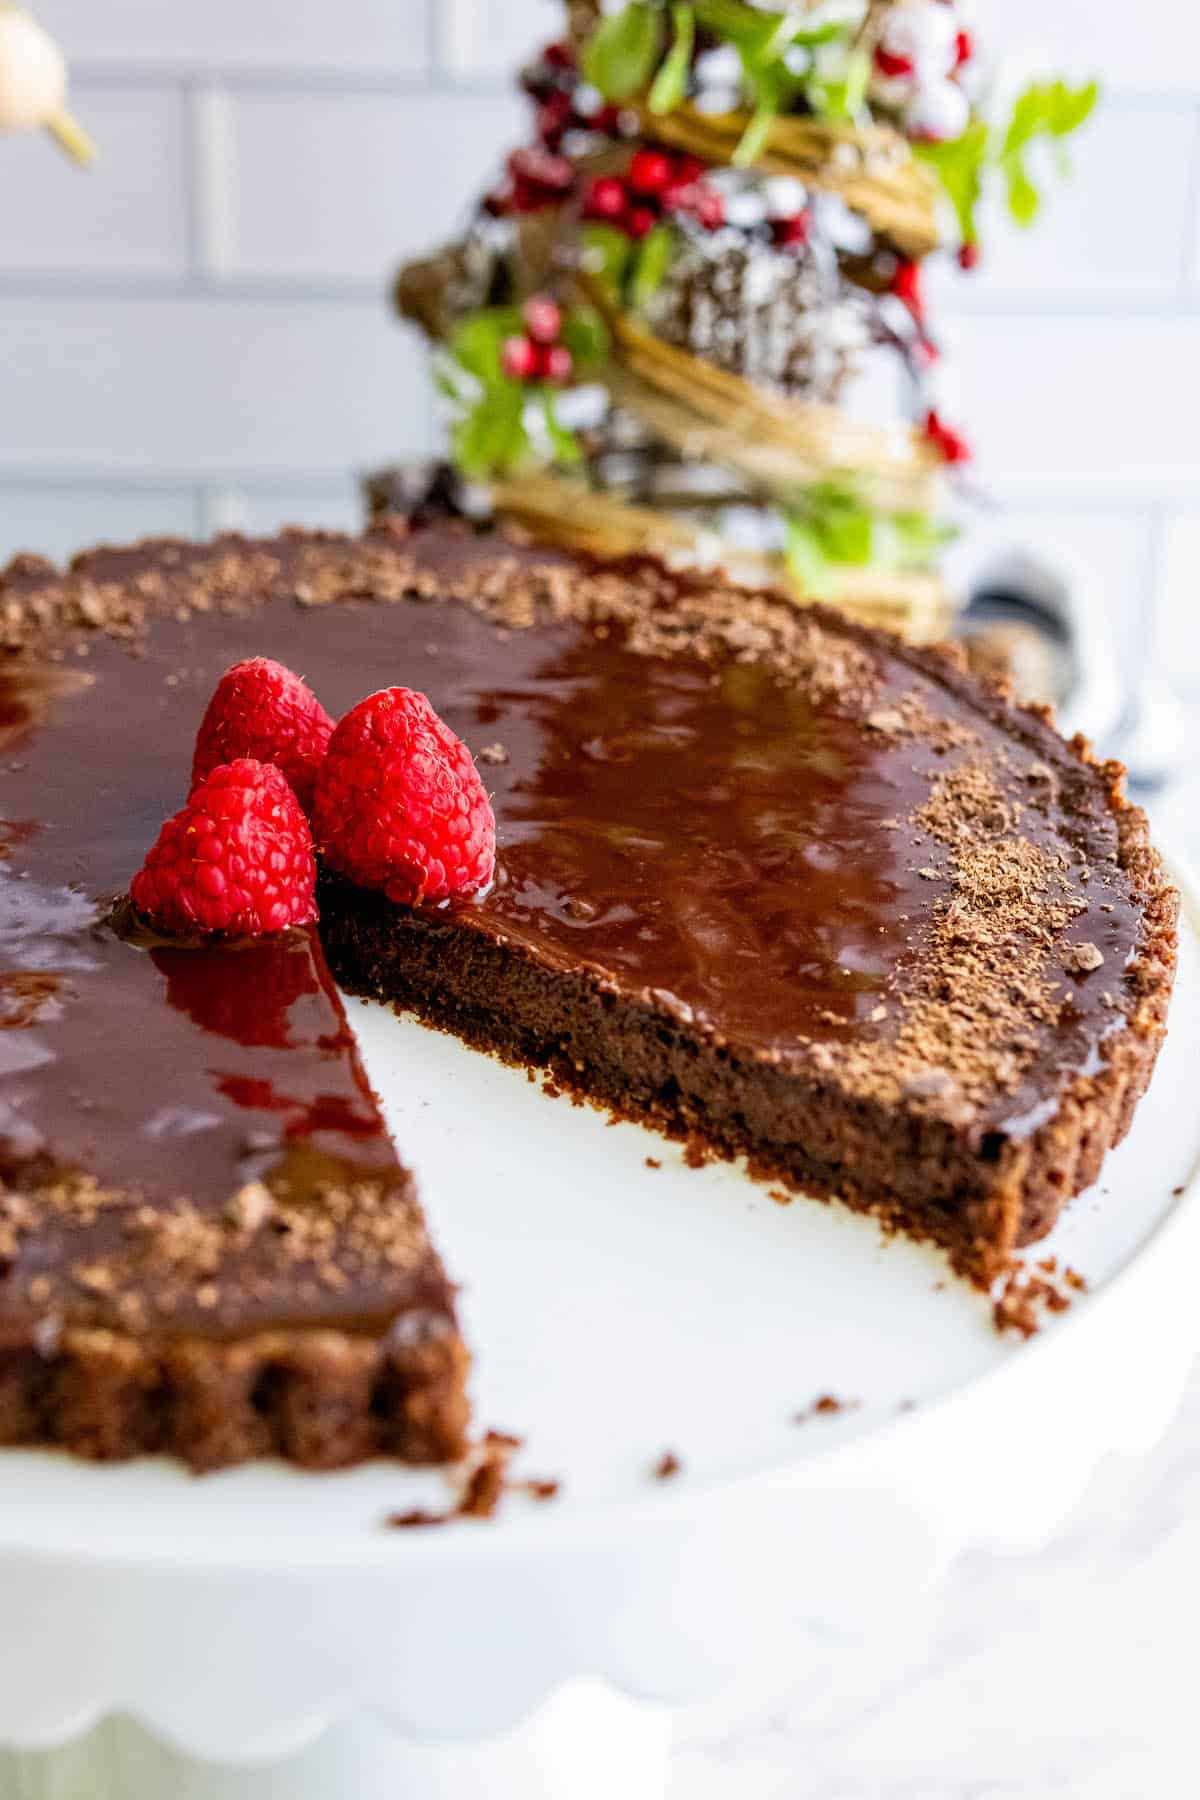 A silky chocolate tart garnished with raspberries on a white plate.